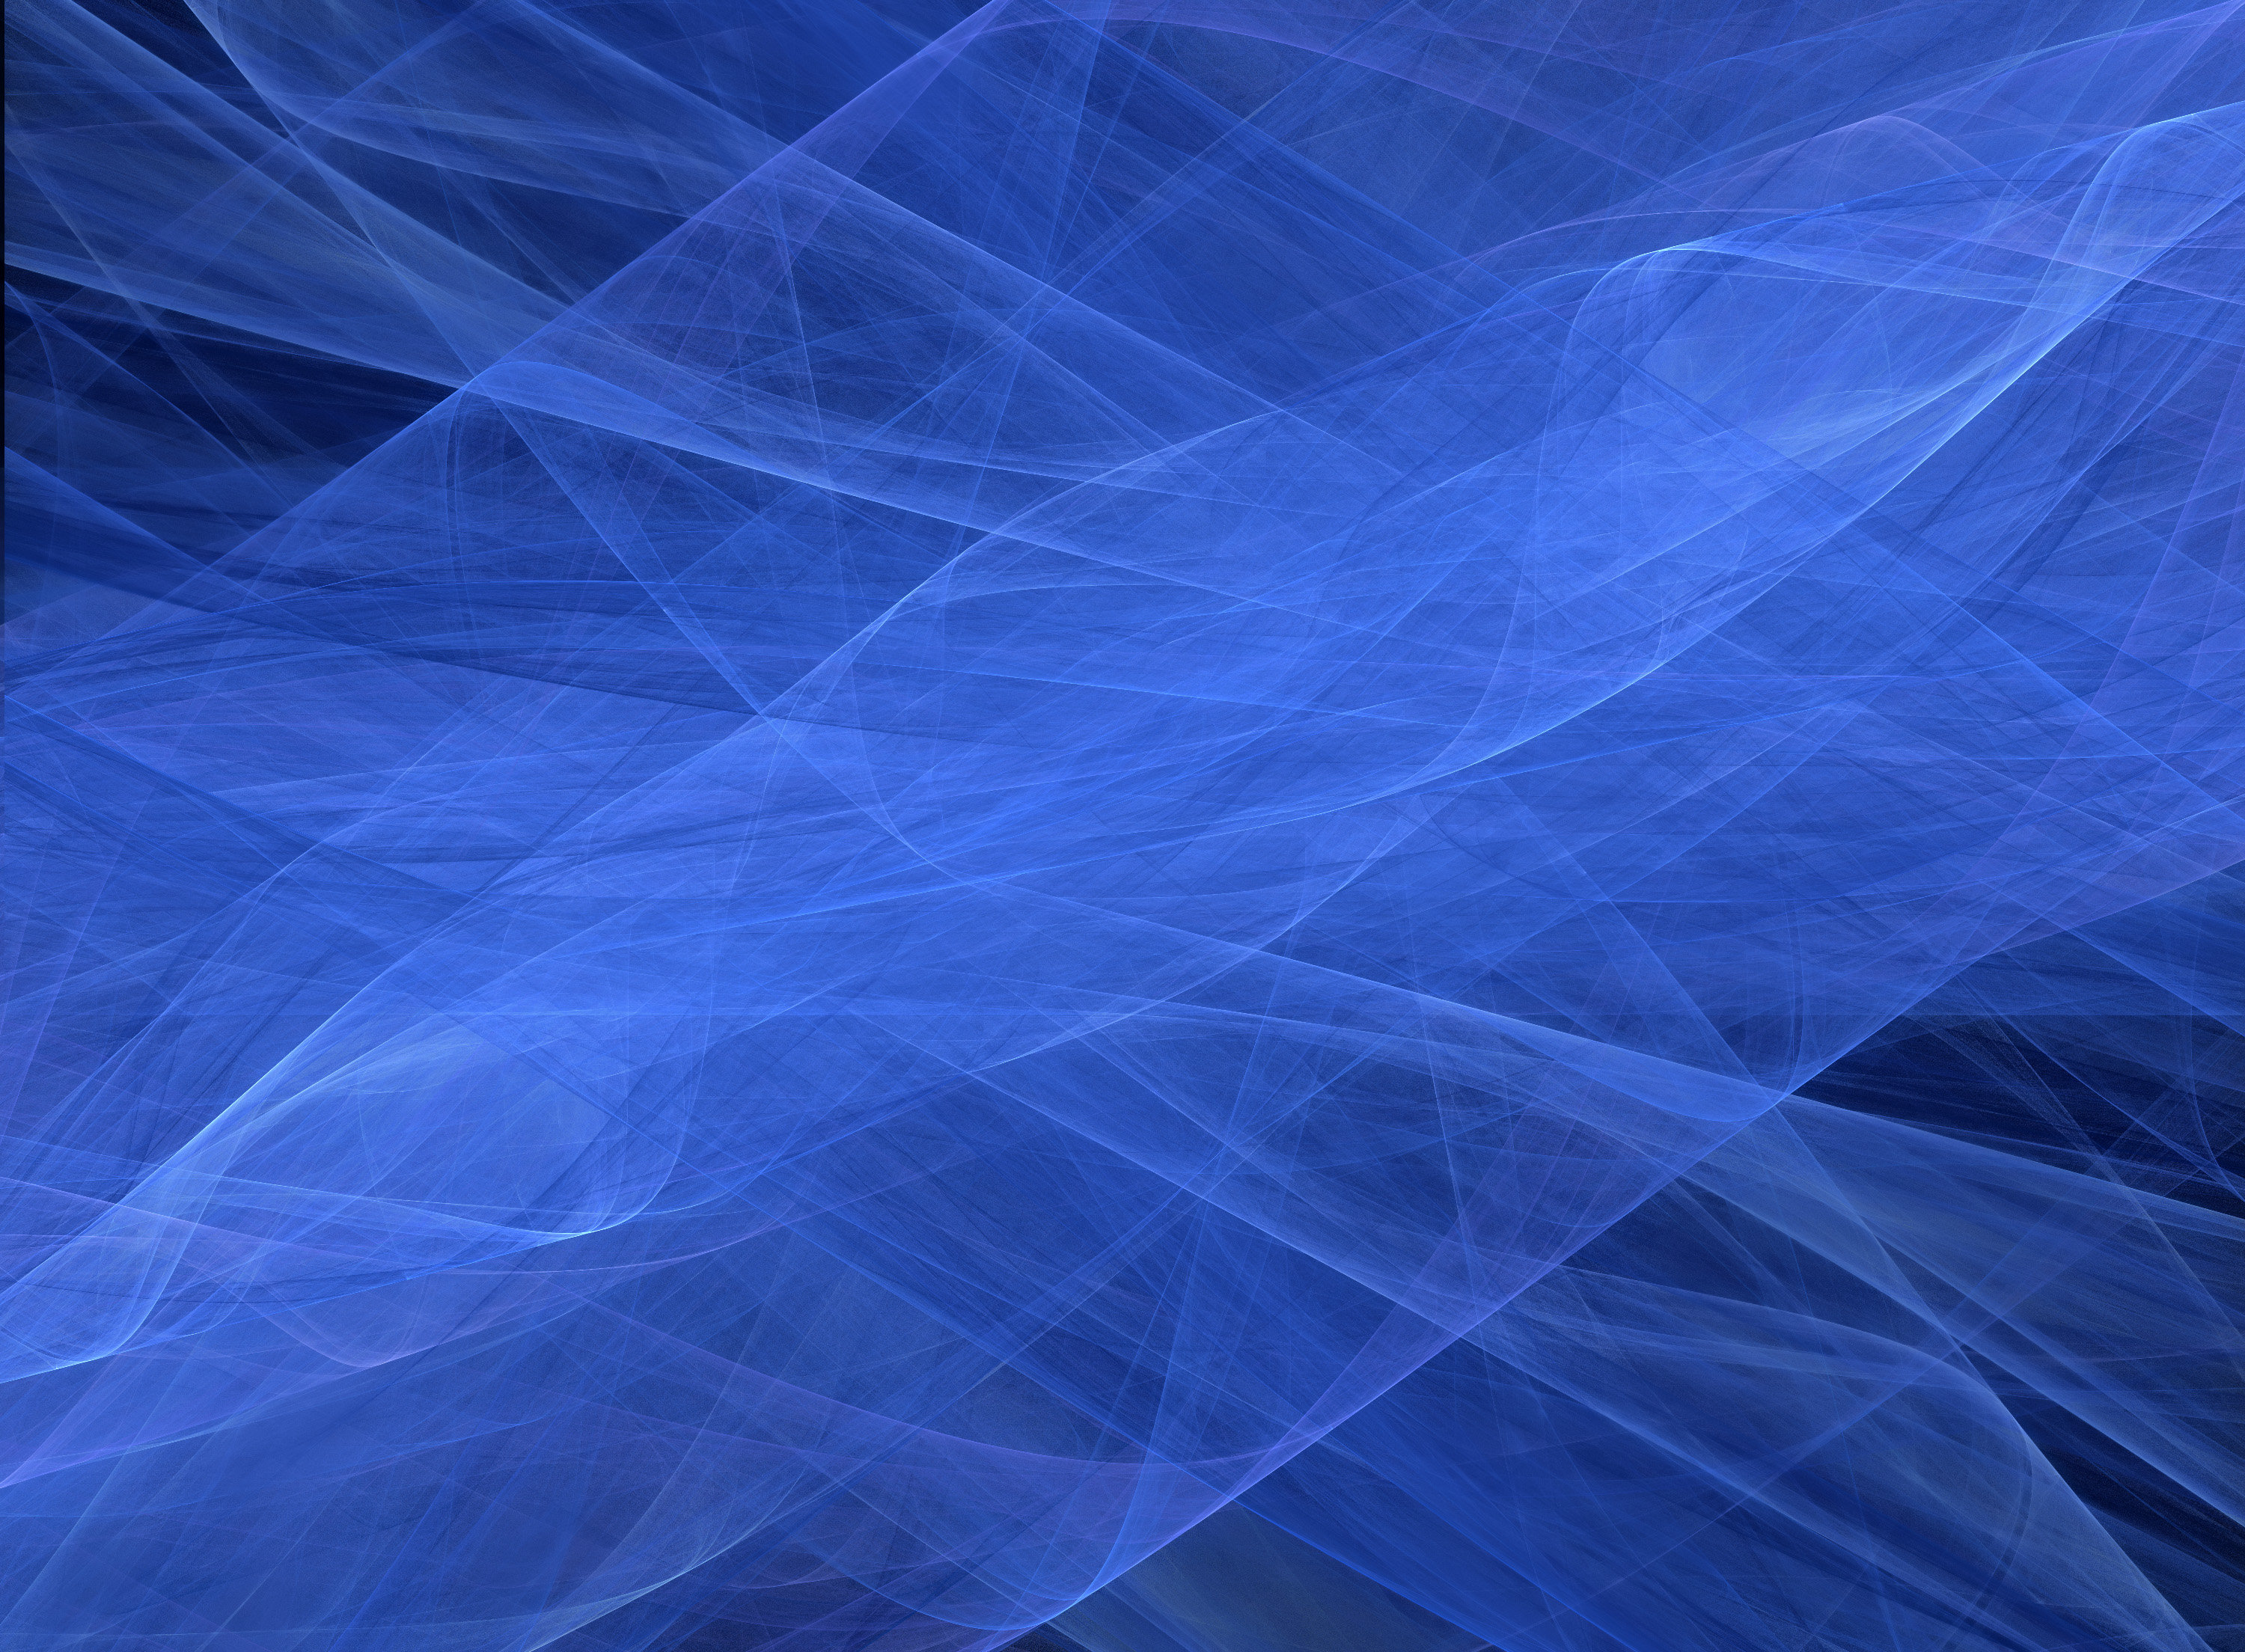 Abstract_blue_background7.jpg